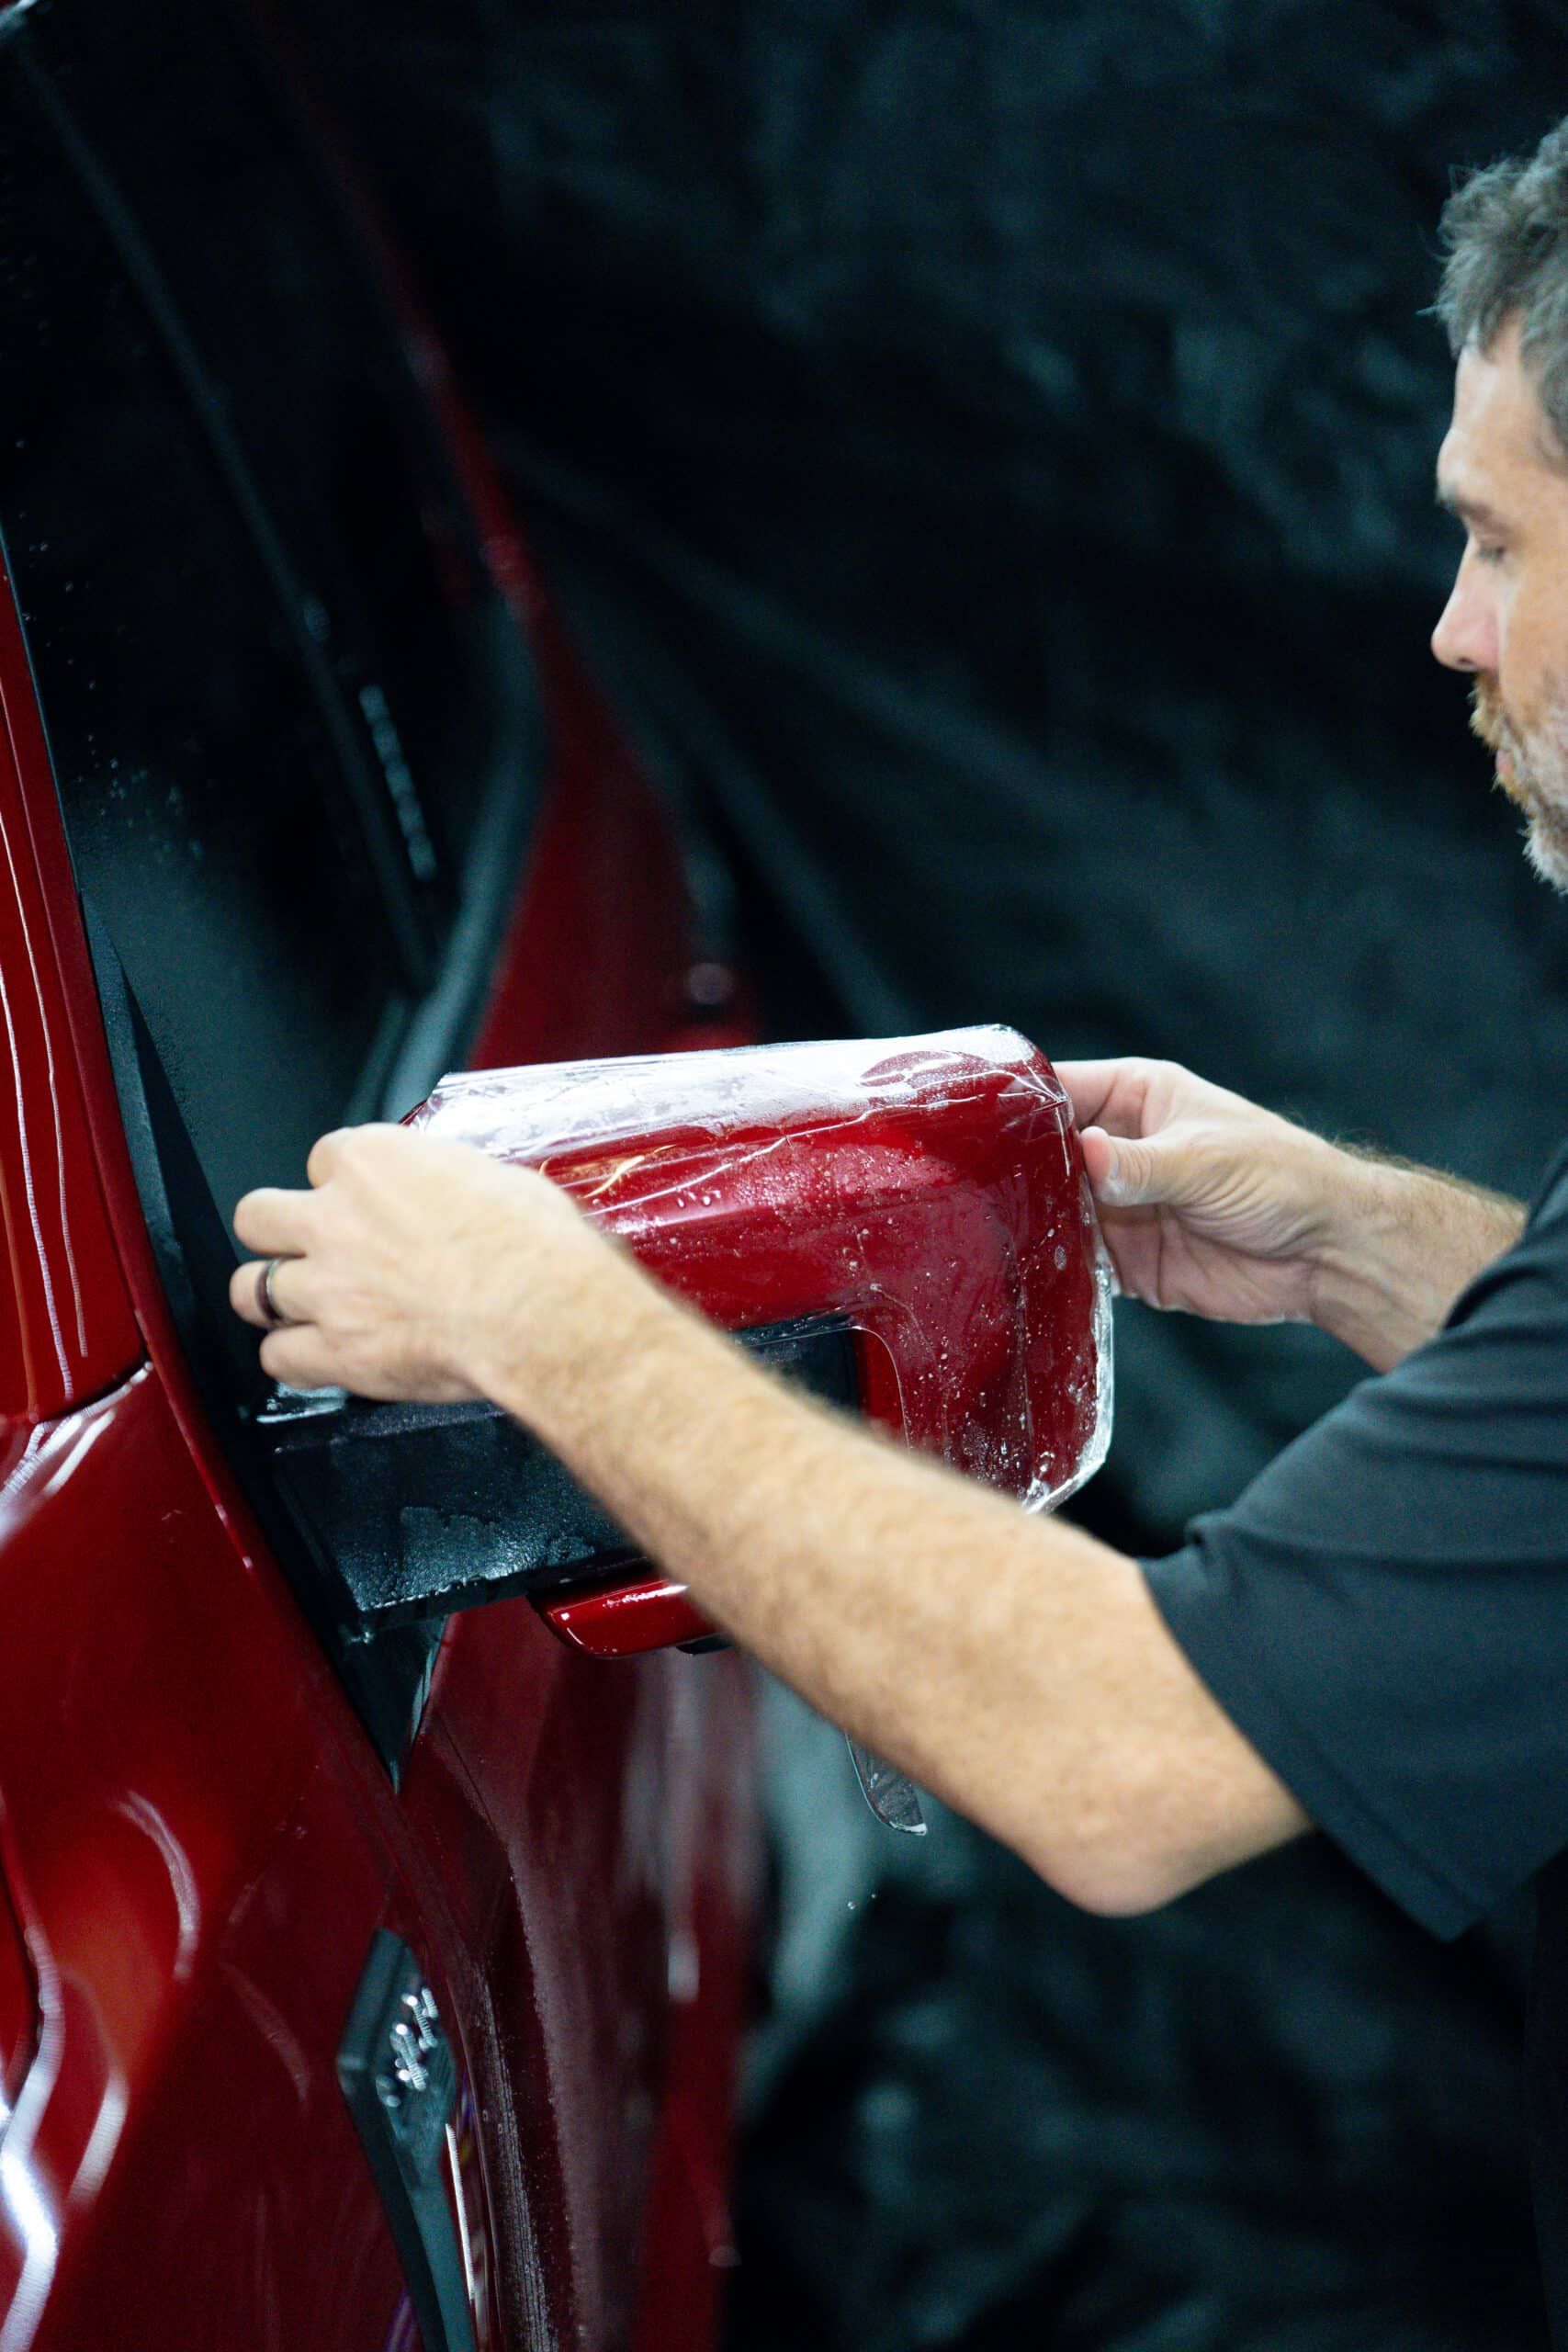 A man is cleaning a red car with a cloth.